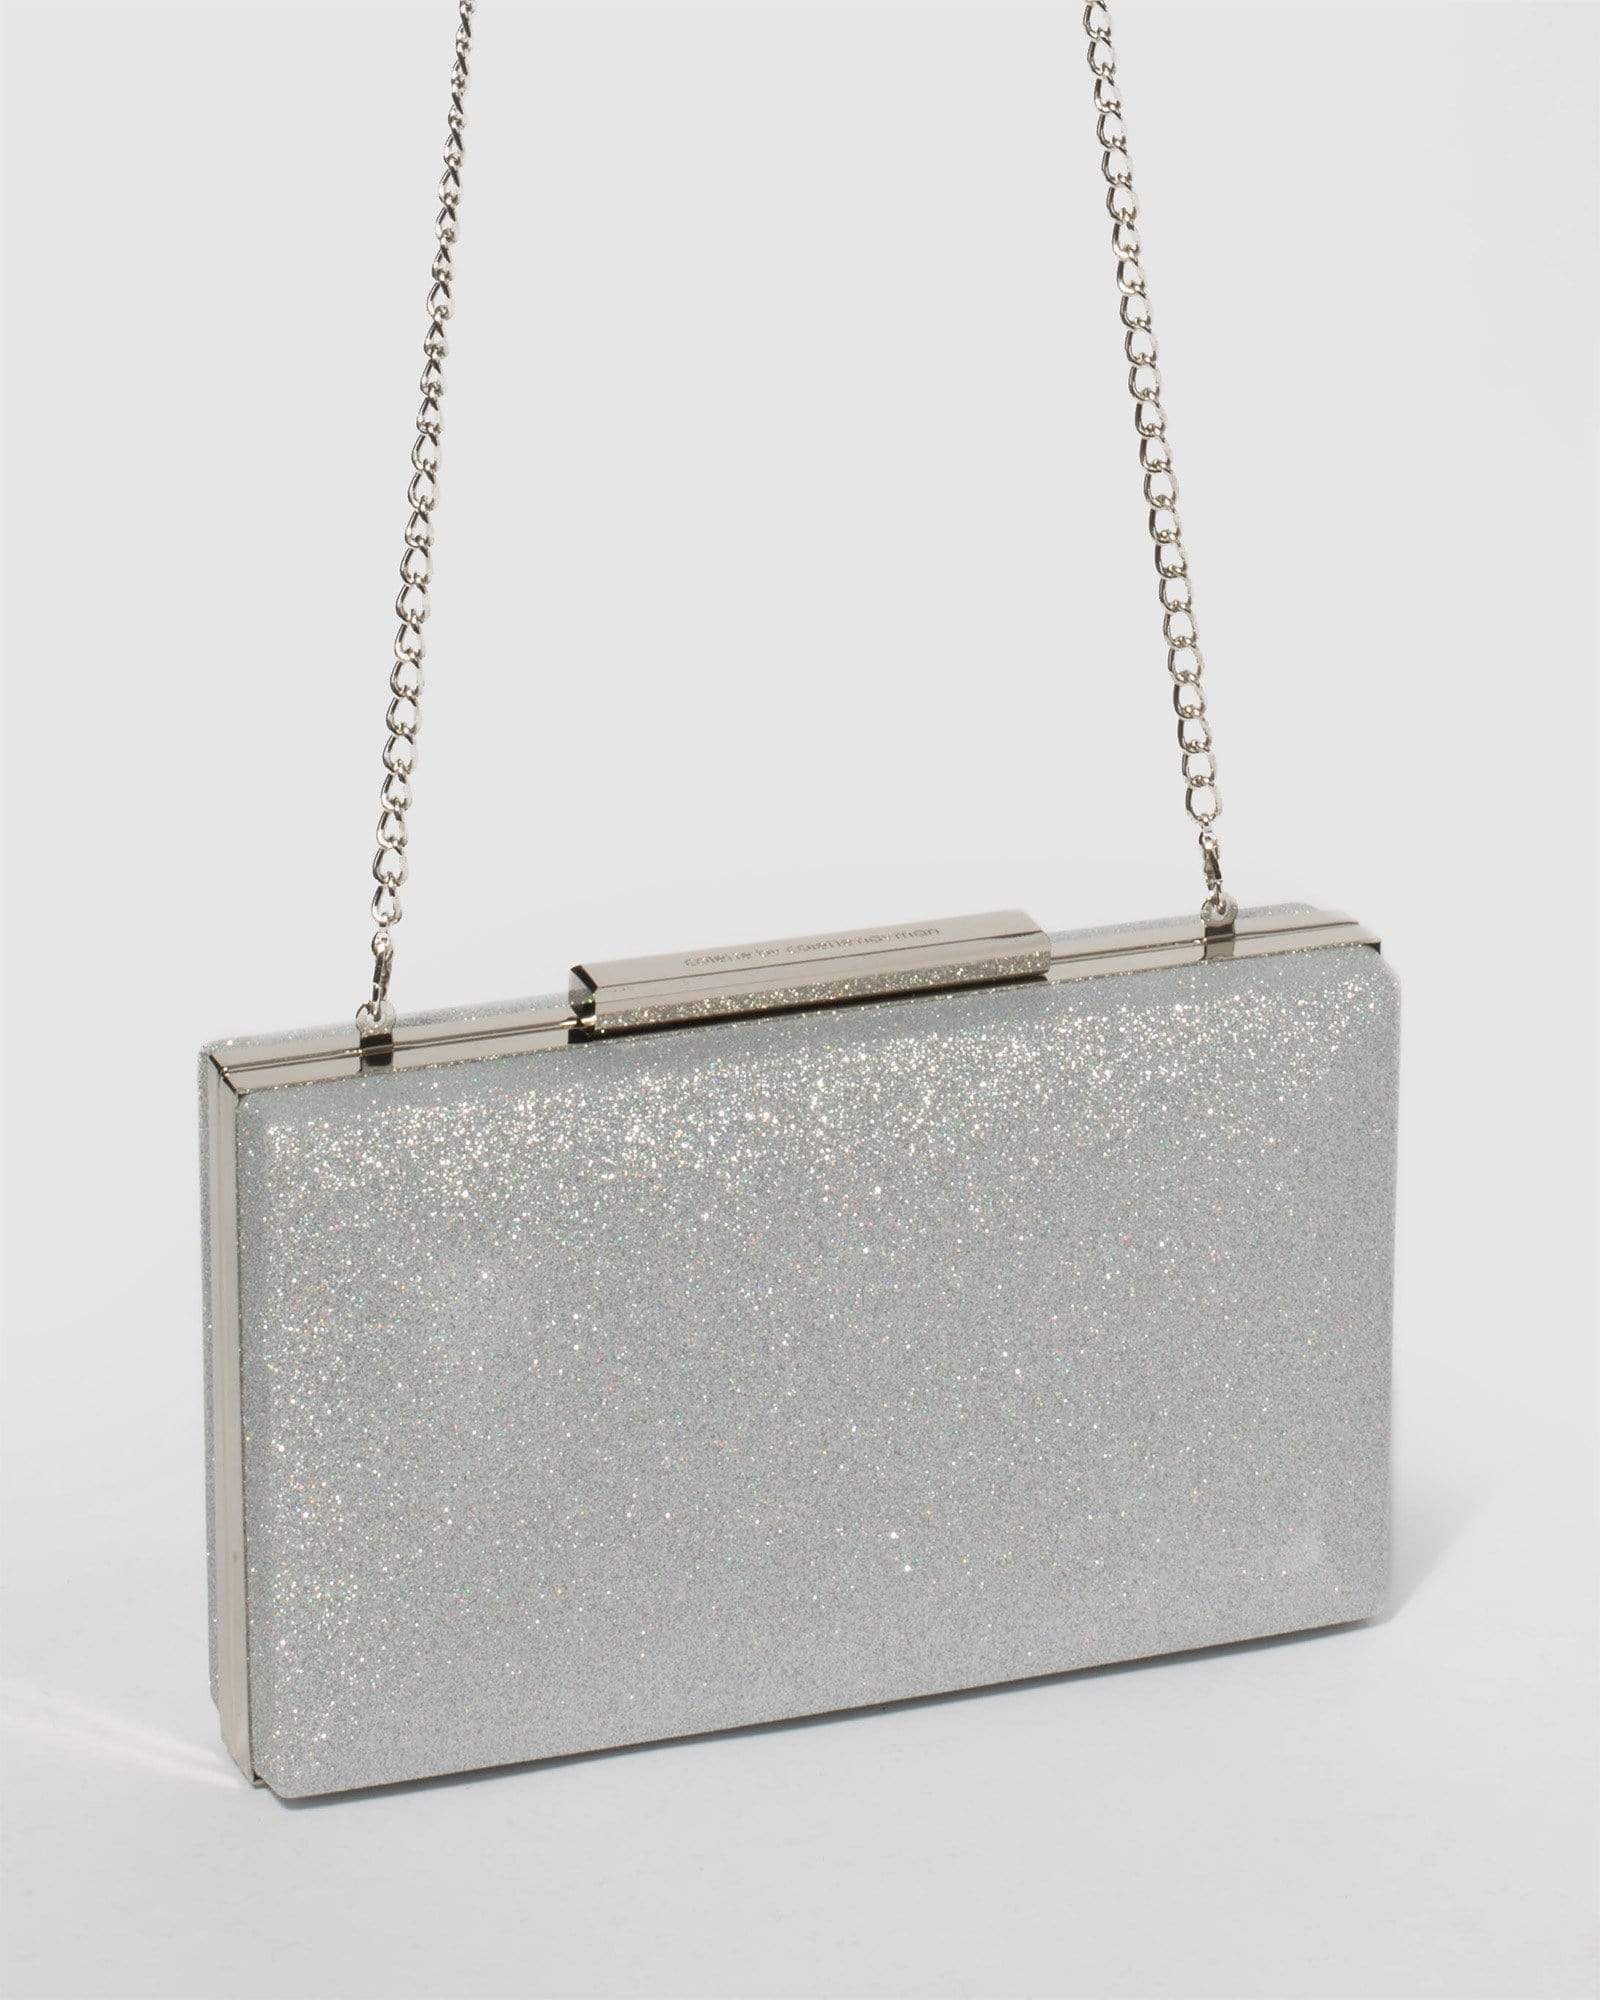 Image of Silver Jaimi Clutch Bag